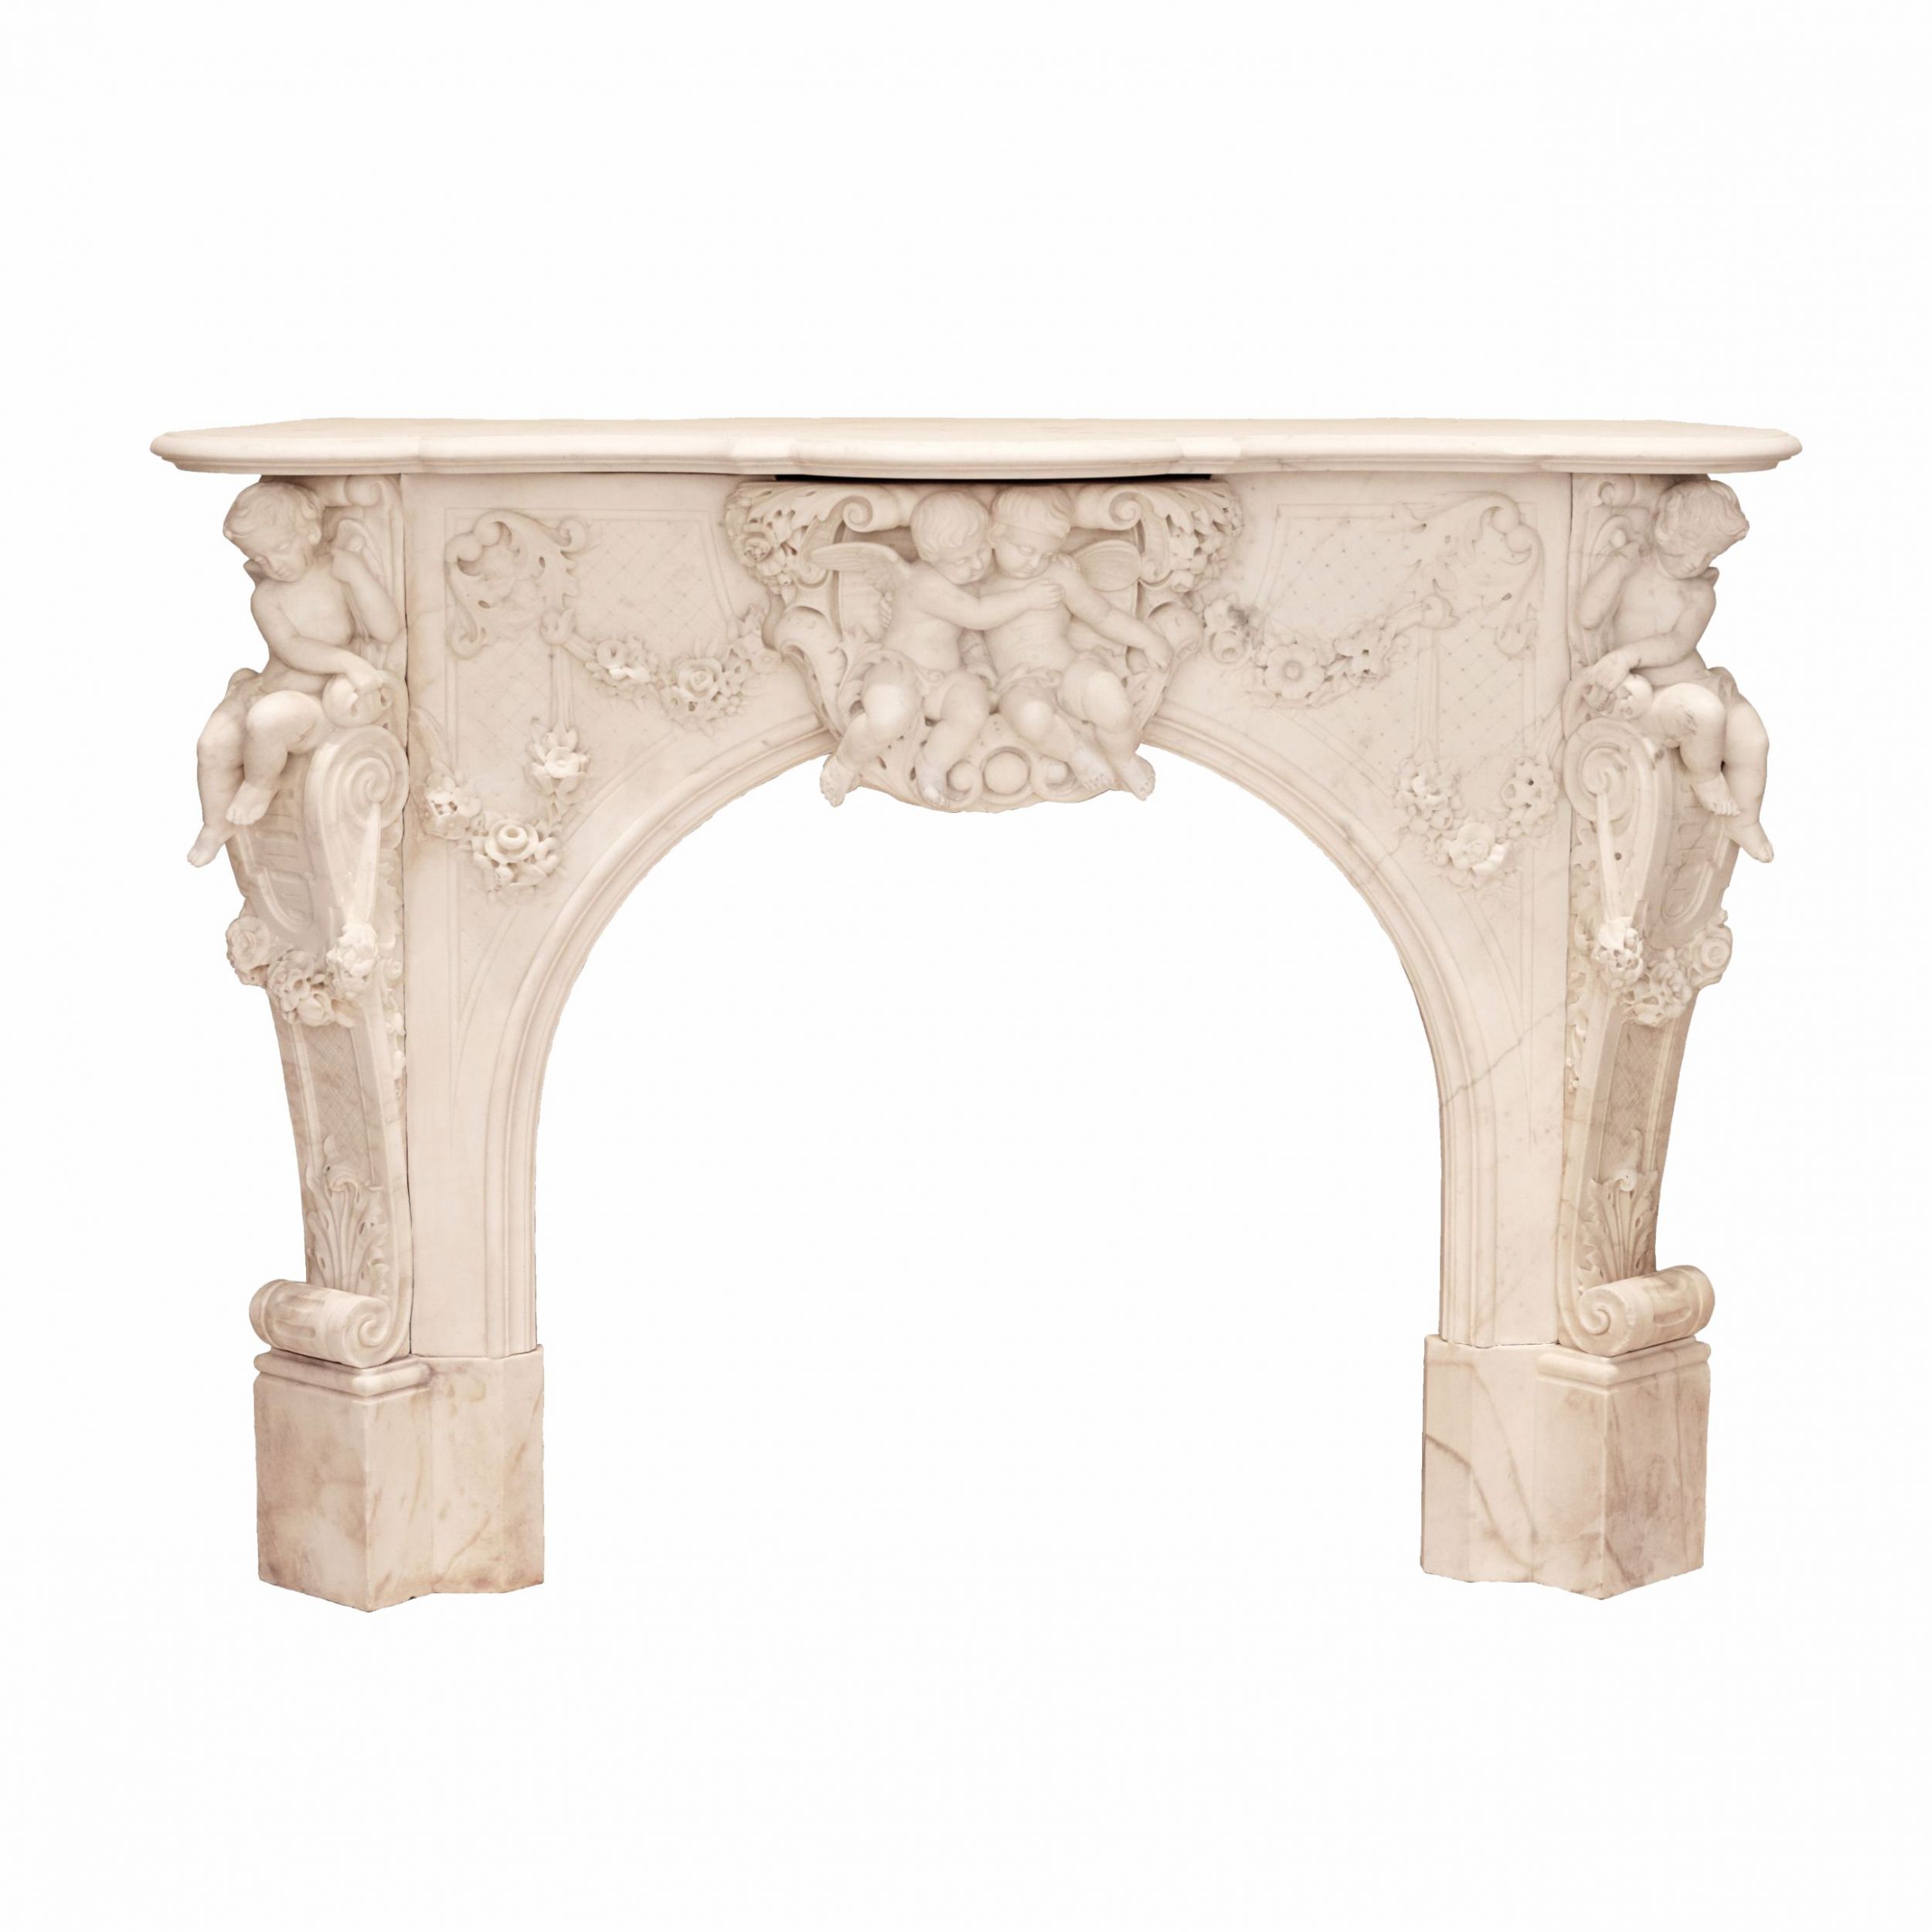 French-white-marble-fireplace-with-cupids-Louis-XV-style-19th-century-